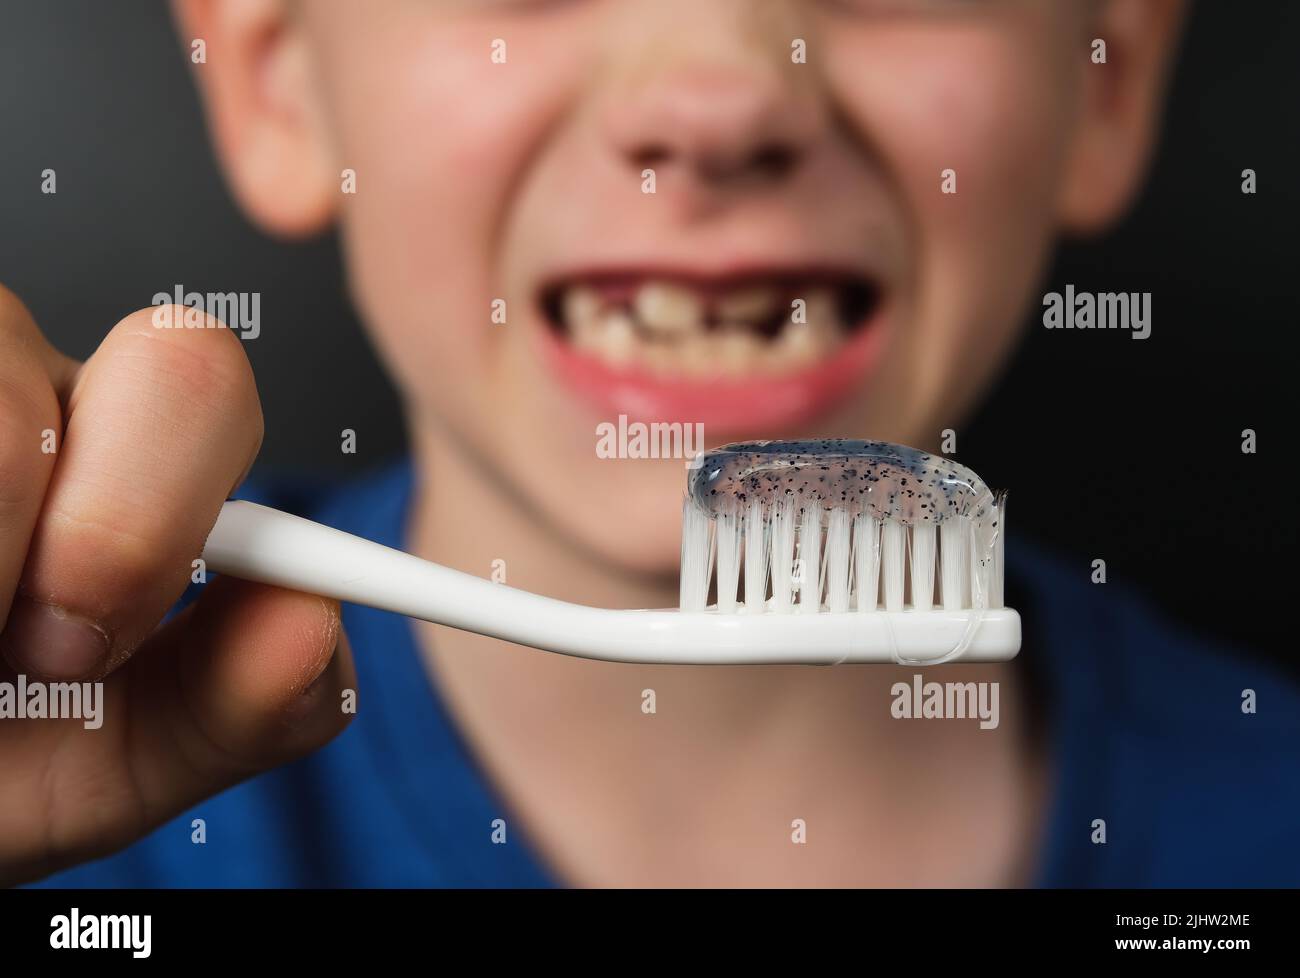 Toothbrush with a toothpaste seen in hands of a  8 years old smiling child, without some teeth. Concept for personal care and hygiene. Stock Photo